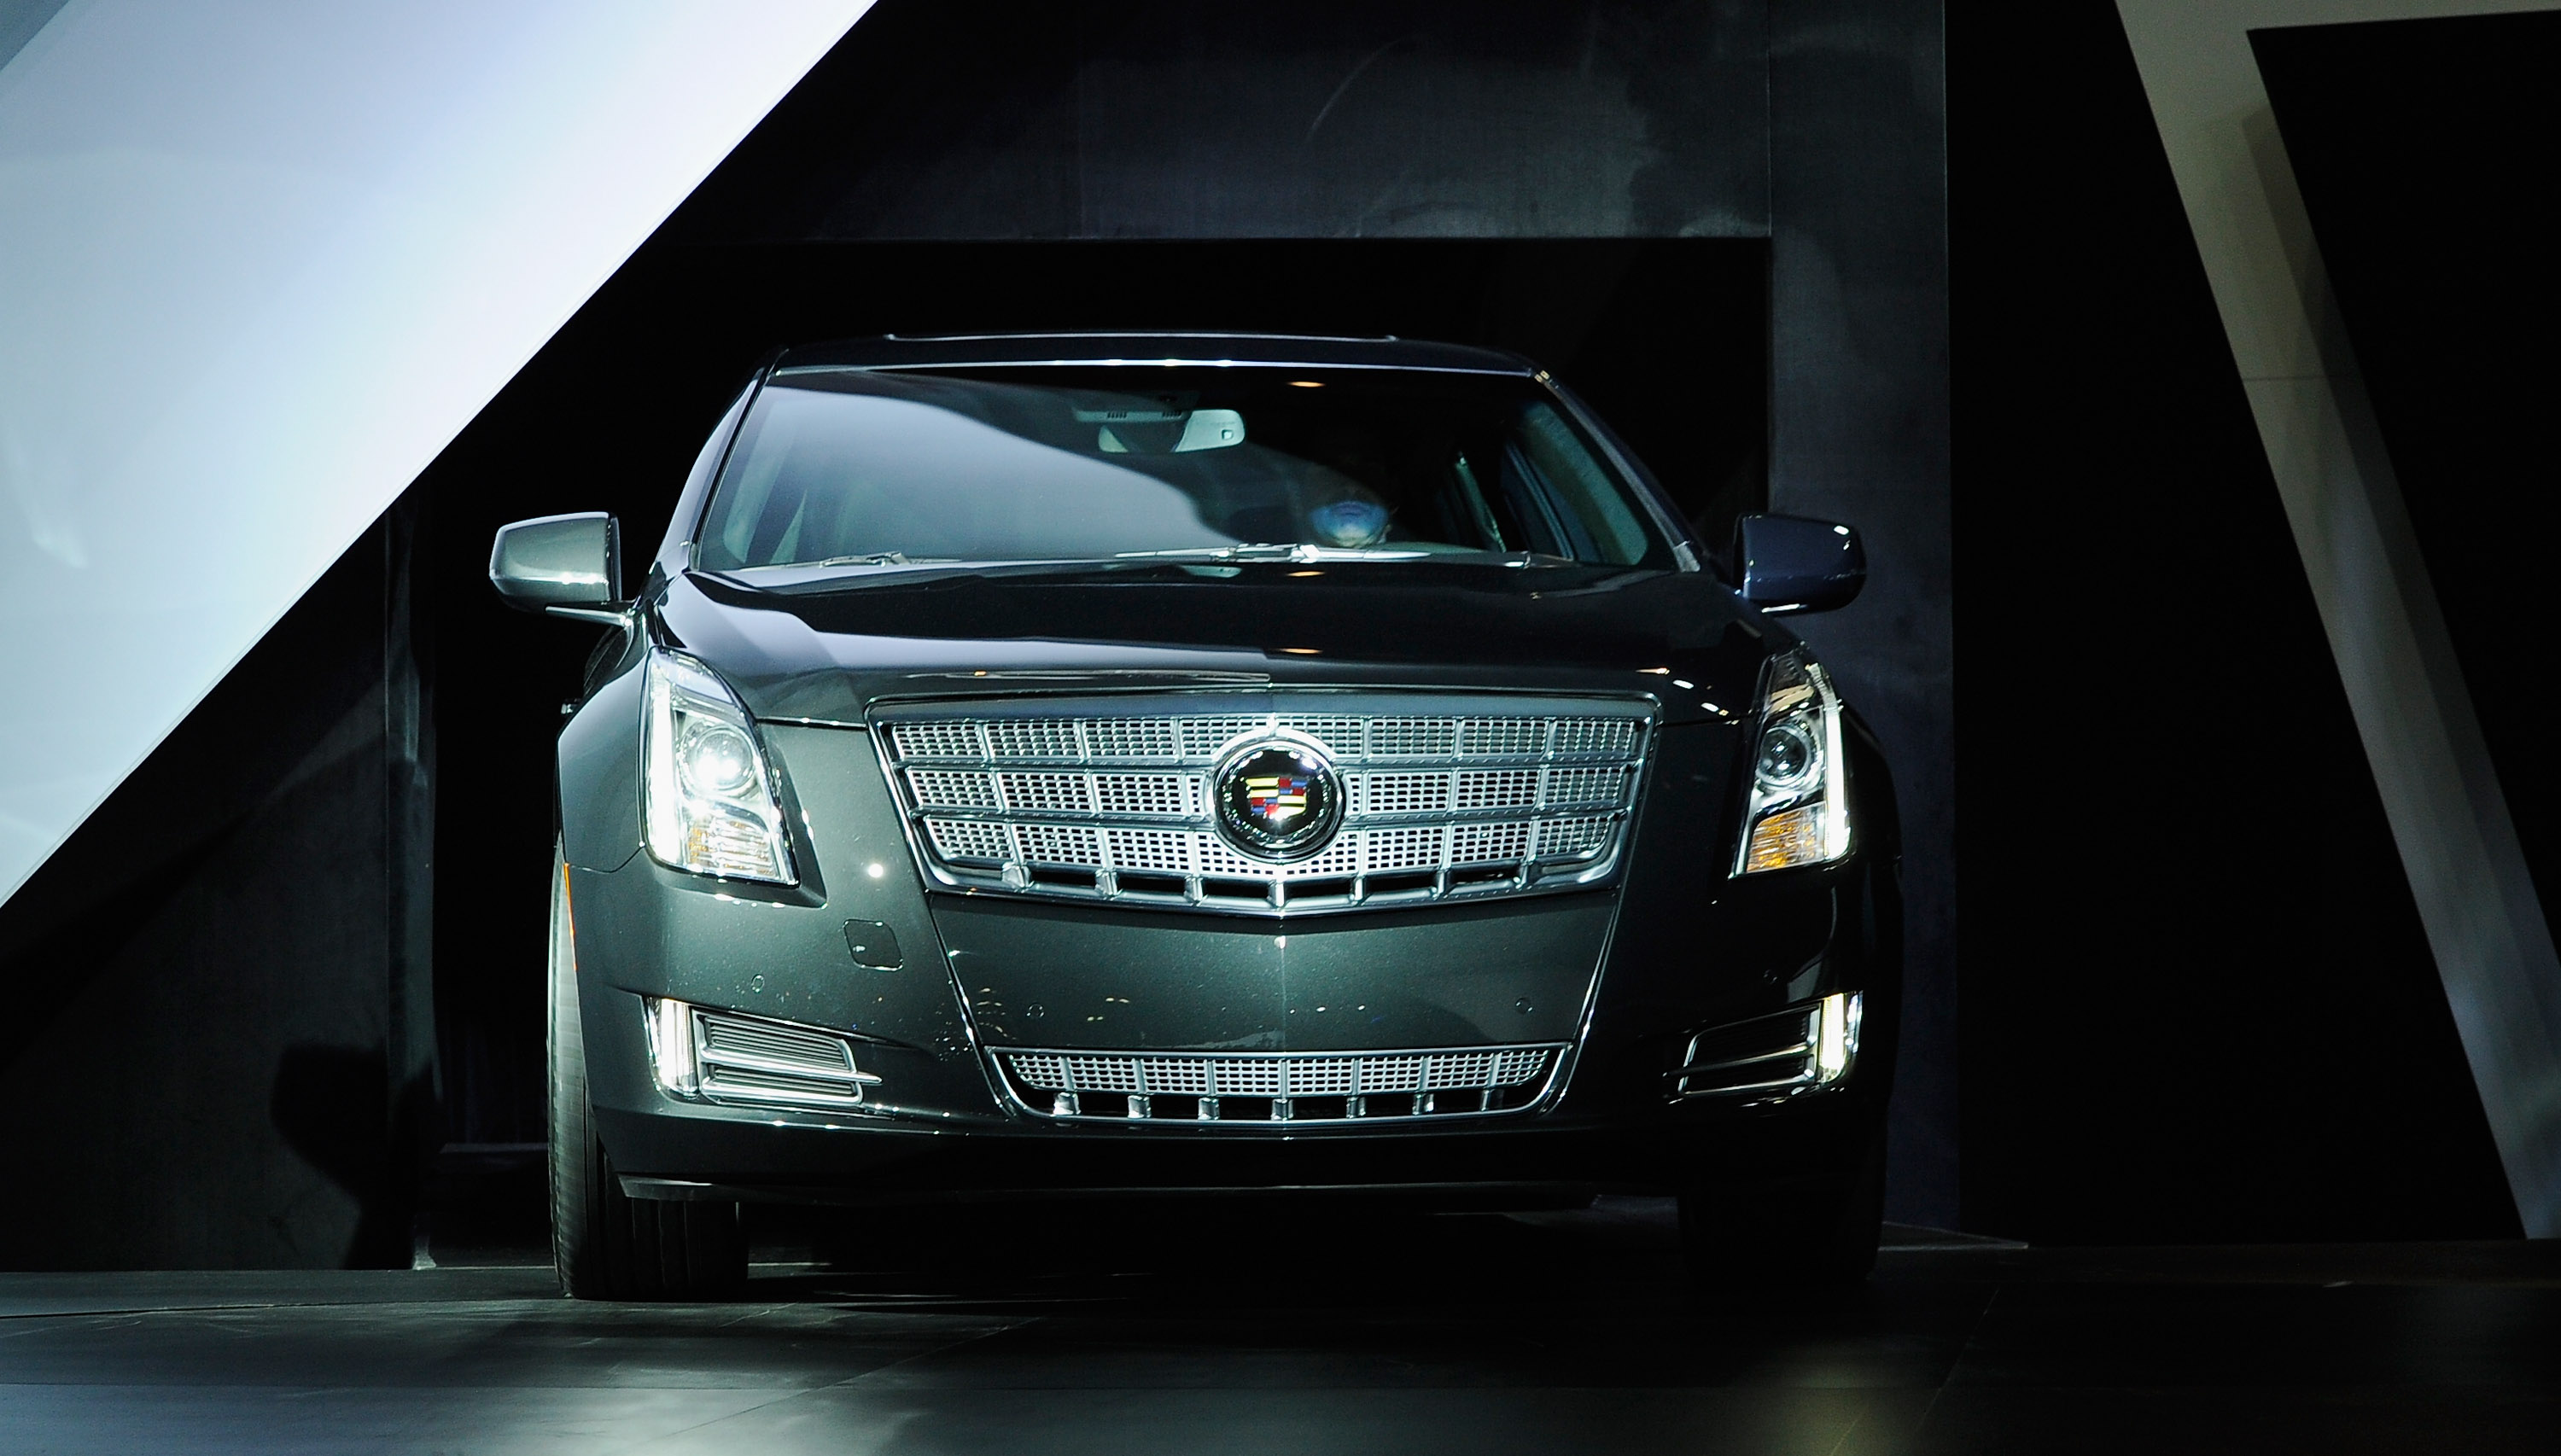 The Cadillac 2013 XTS is unveiled during the LA Auto Show on November 16, 2011 in Los Angeles. (Kevork Djansezian—Getty Images)